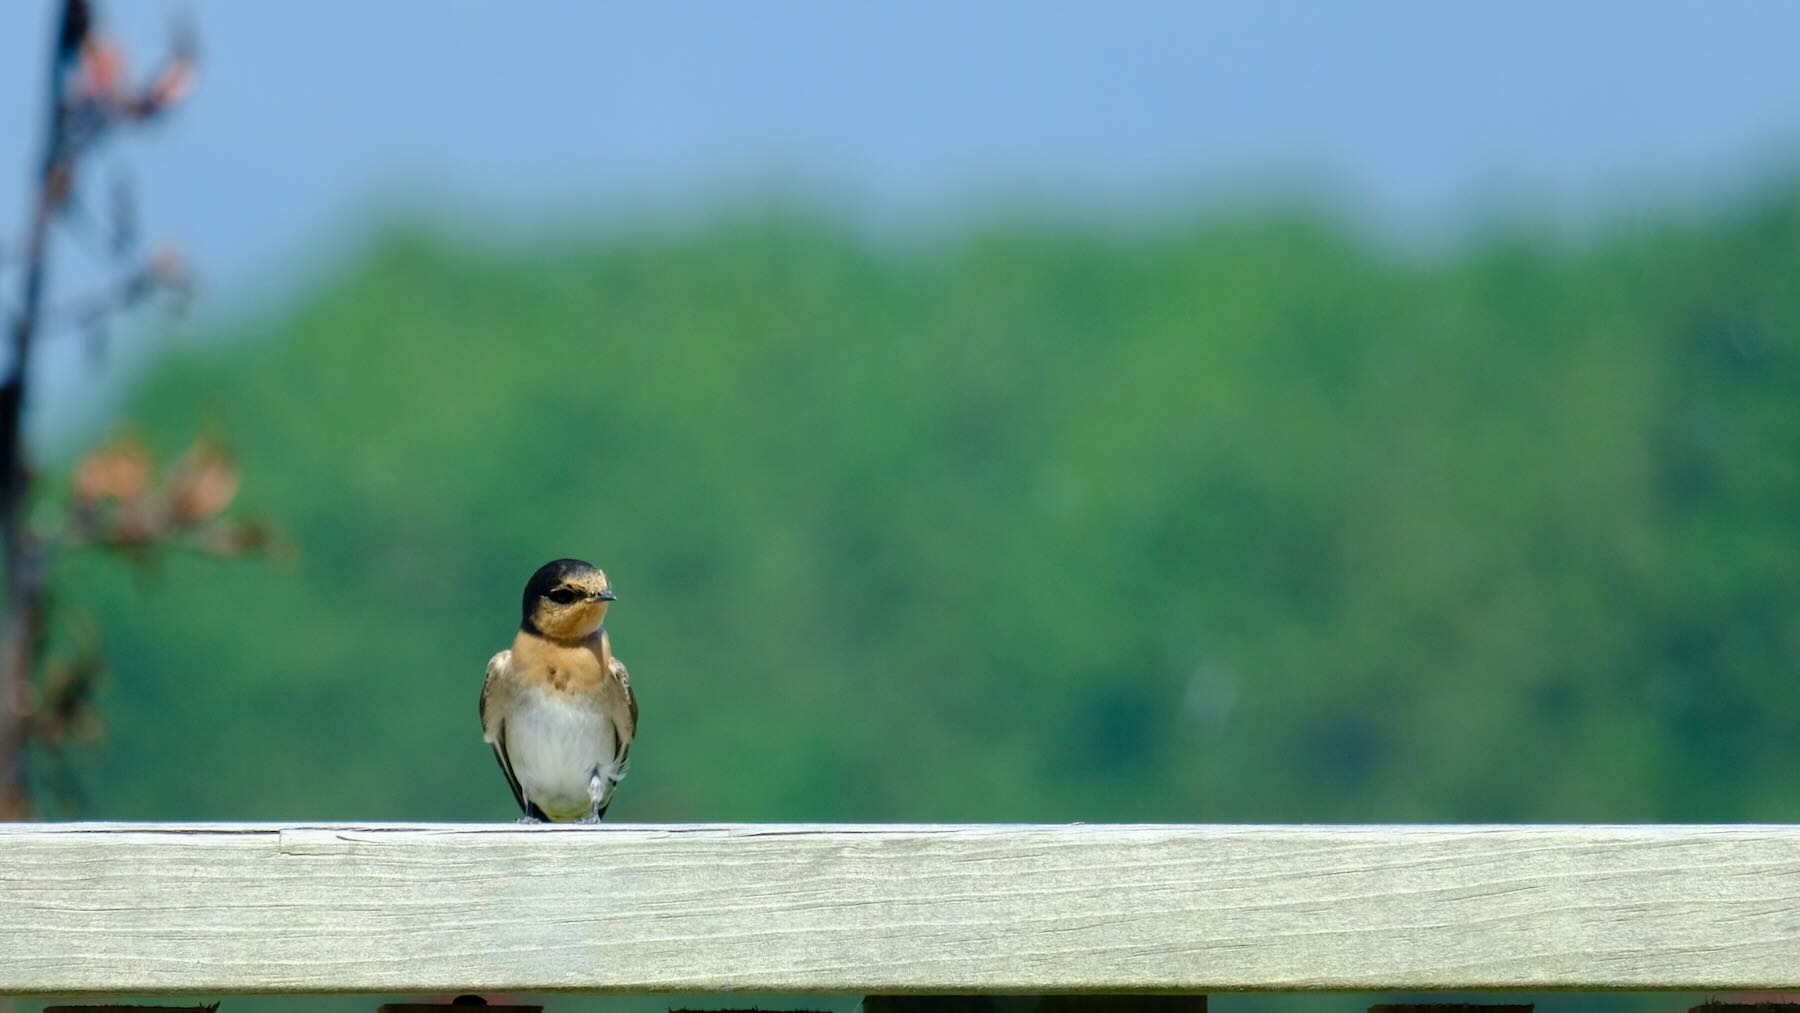 Swallow on a railing. 